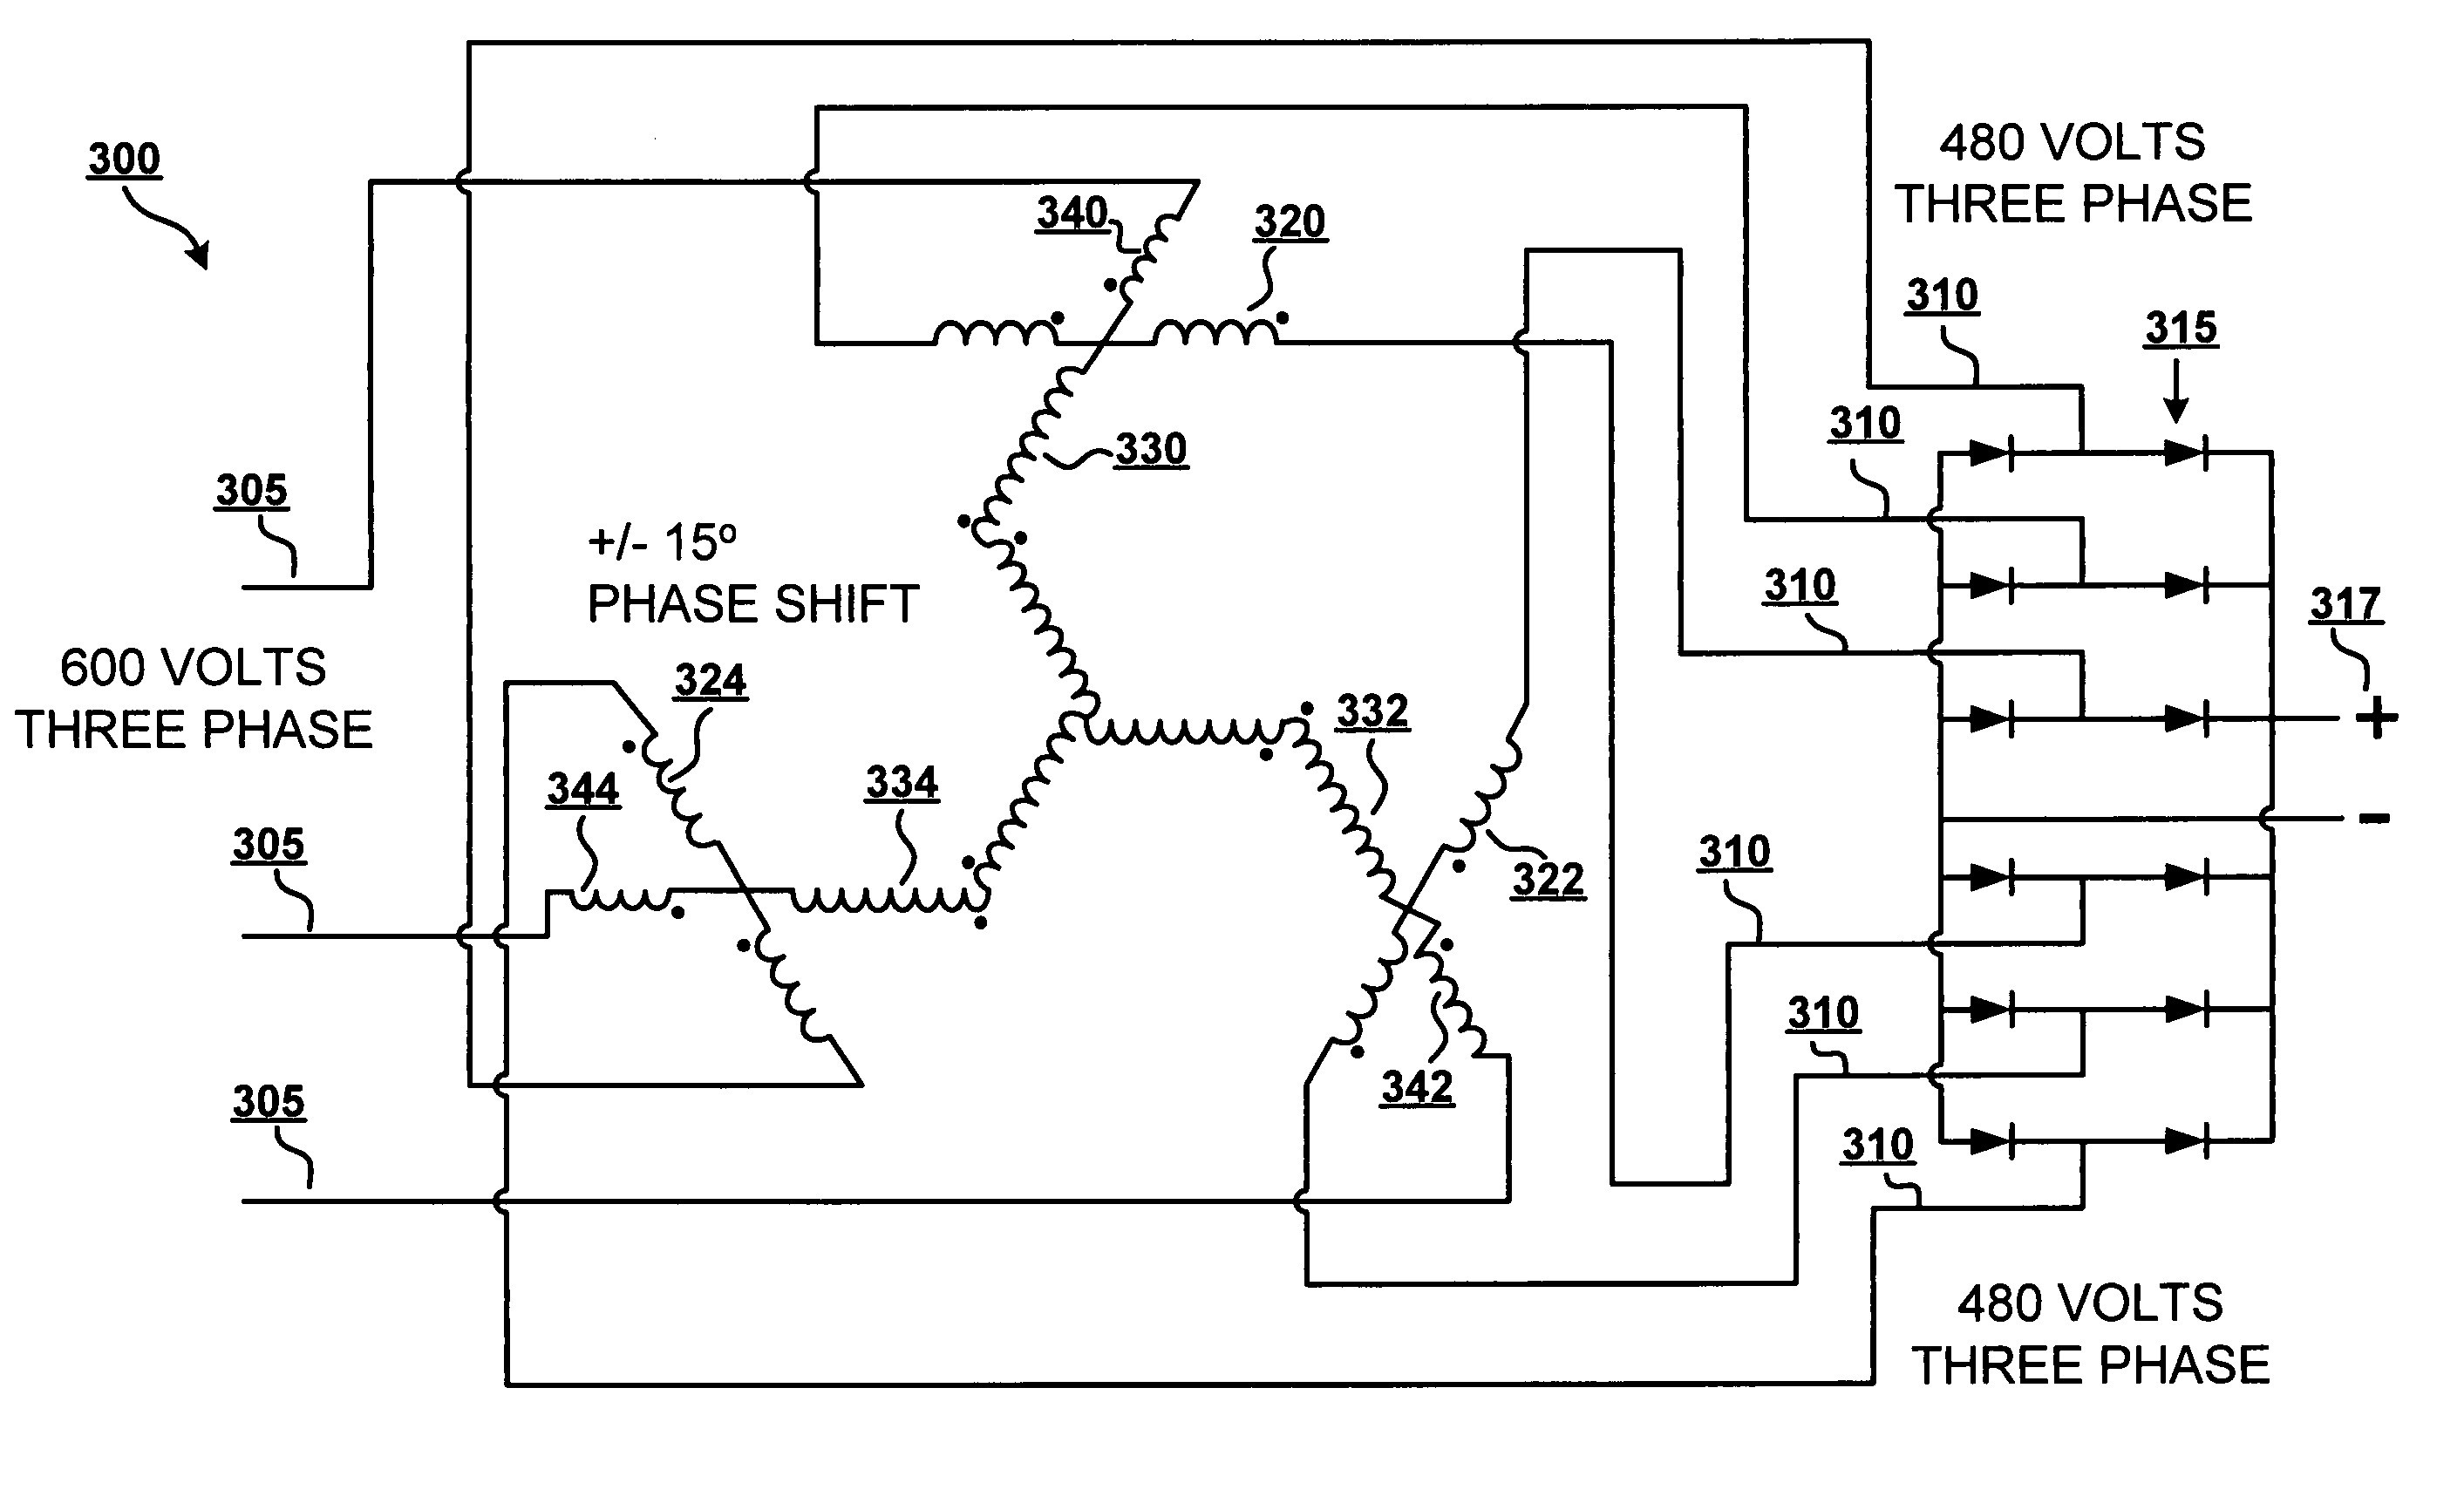 Aaronscher Resonant Coupling Networks Equivalent Circuit Two And Powerstat Variable Autotransformer Wiring Nice Autotransformer Wiring Diagram